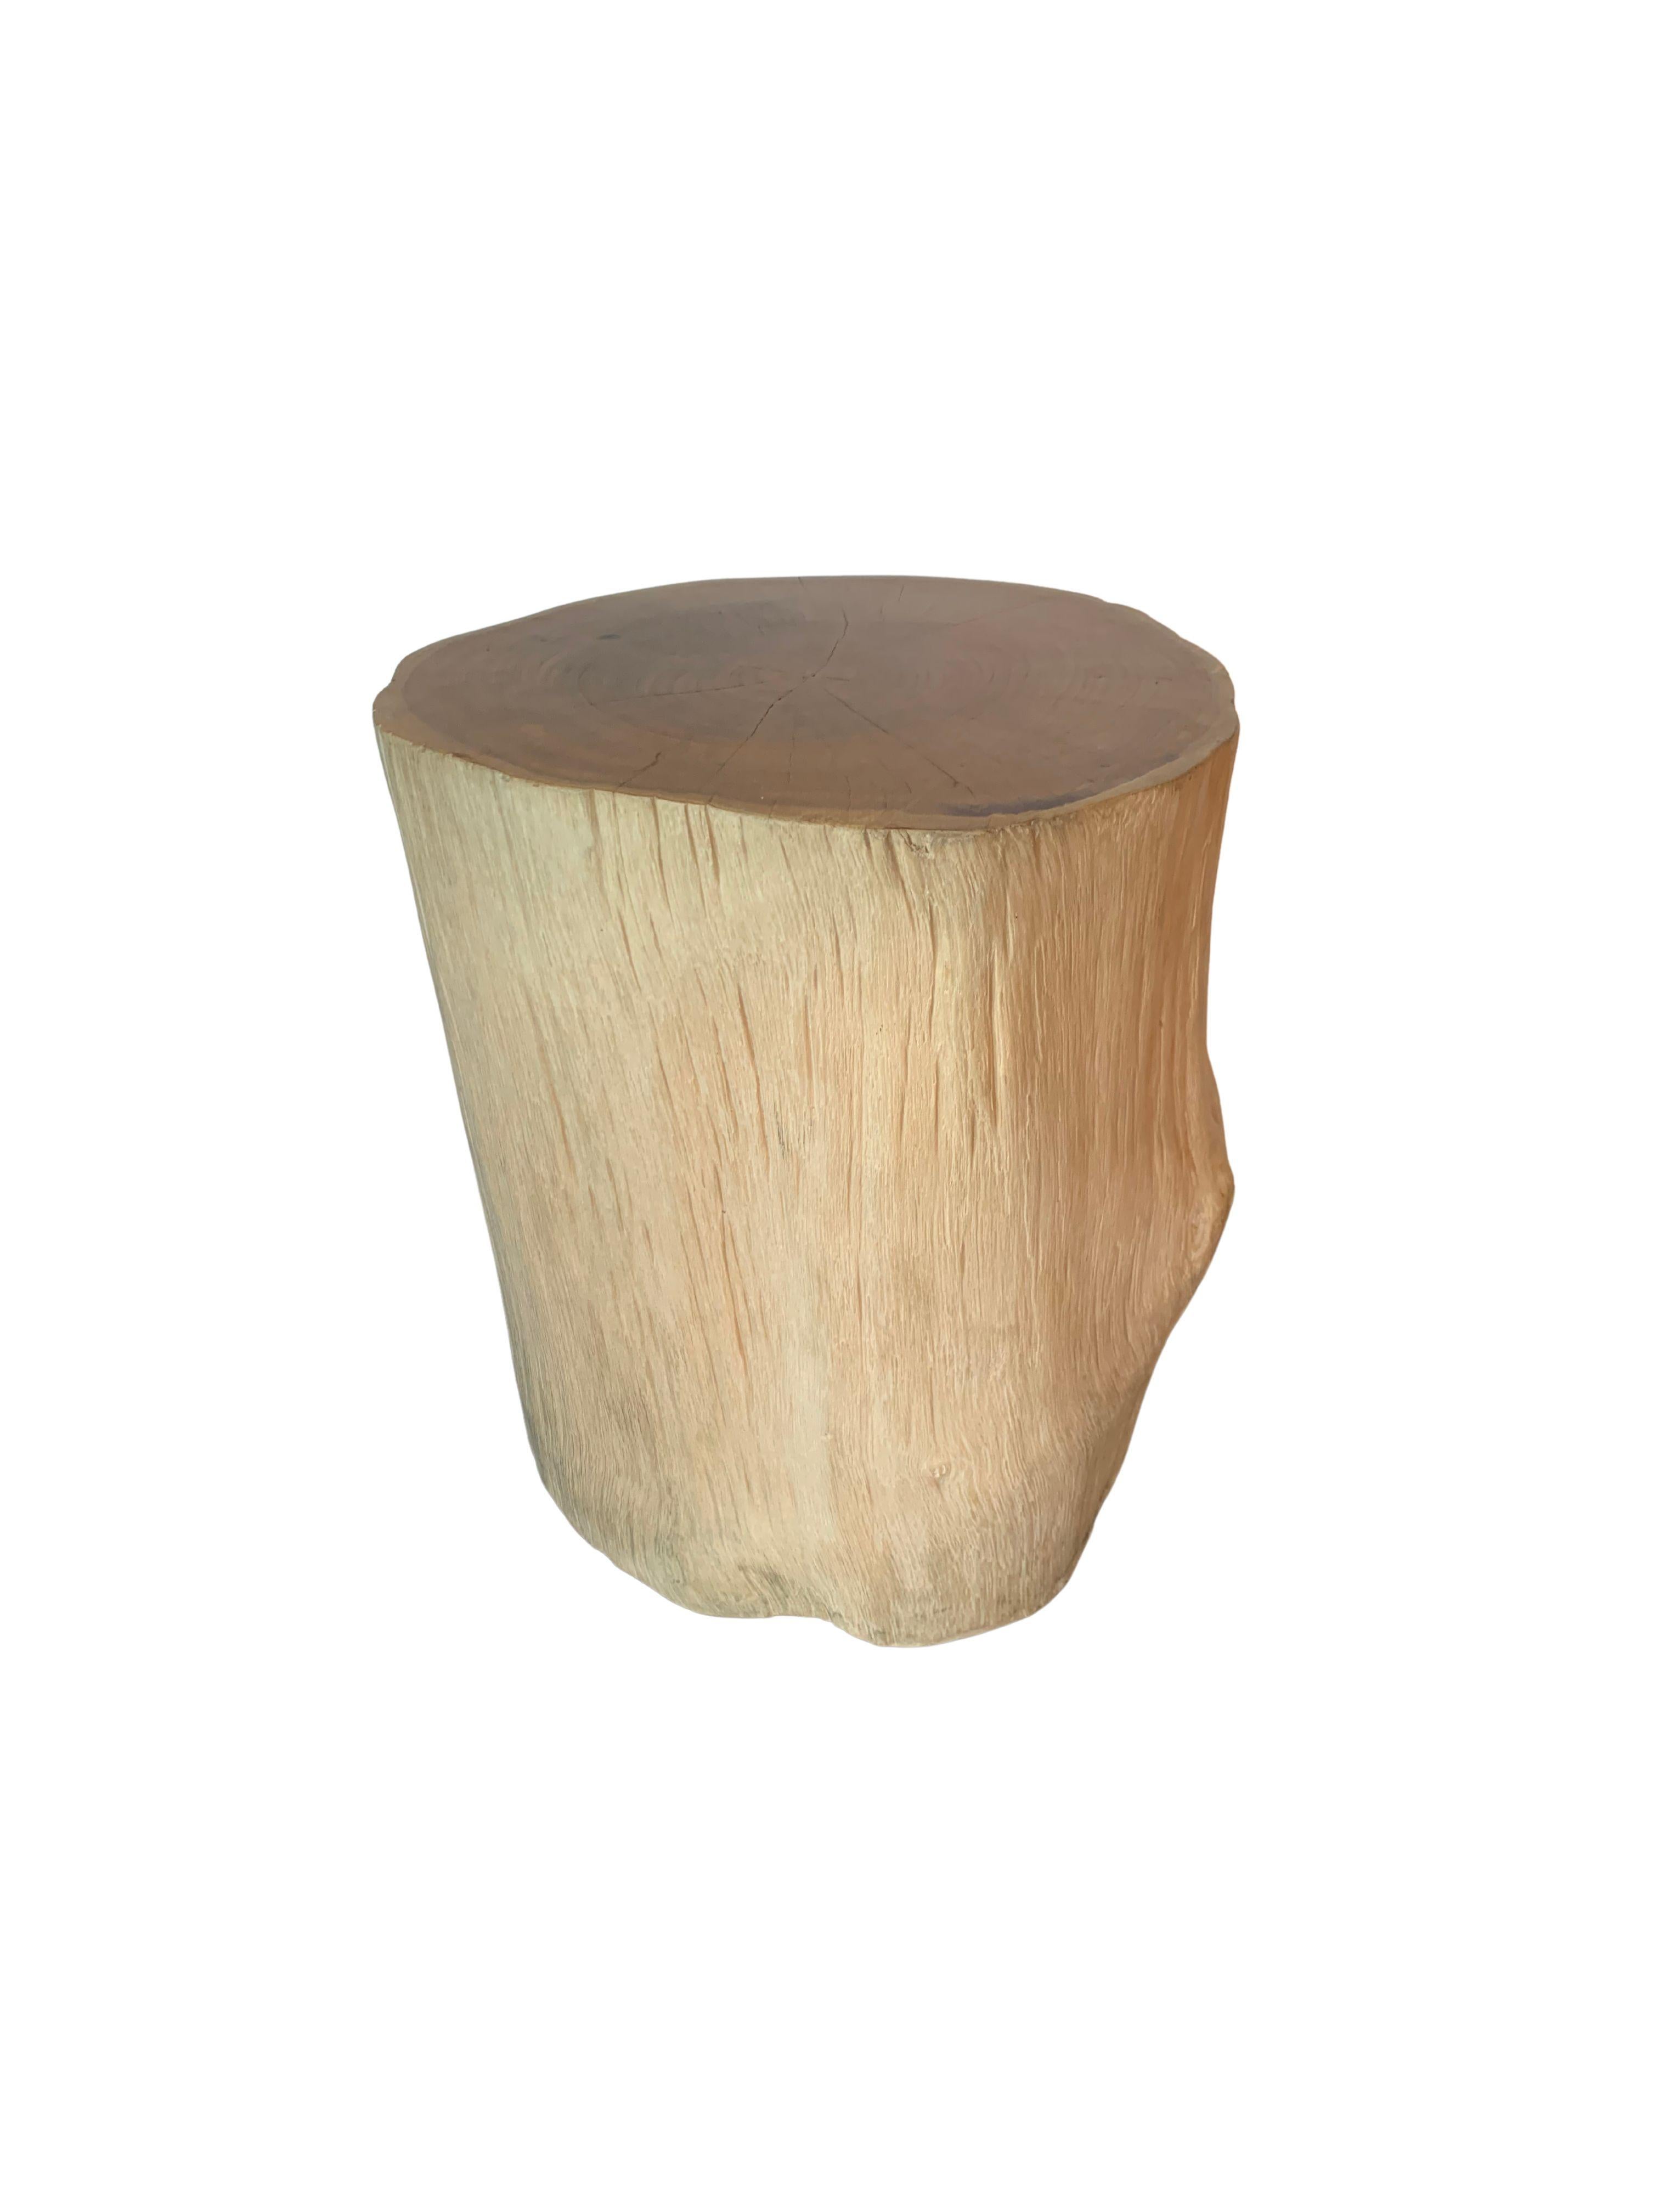 Contemporary Tree Trunk Side Table Solid Teak Wood Bleached Finish Modern Organic For Sale